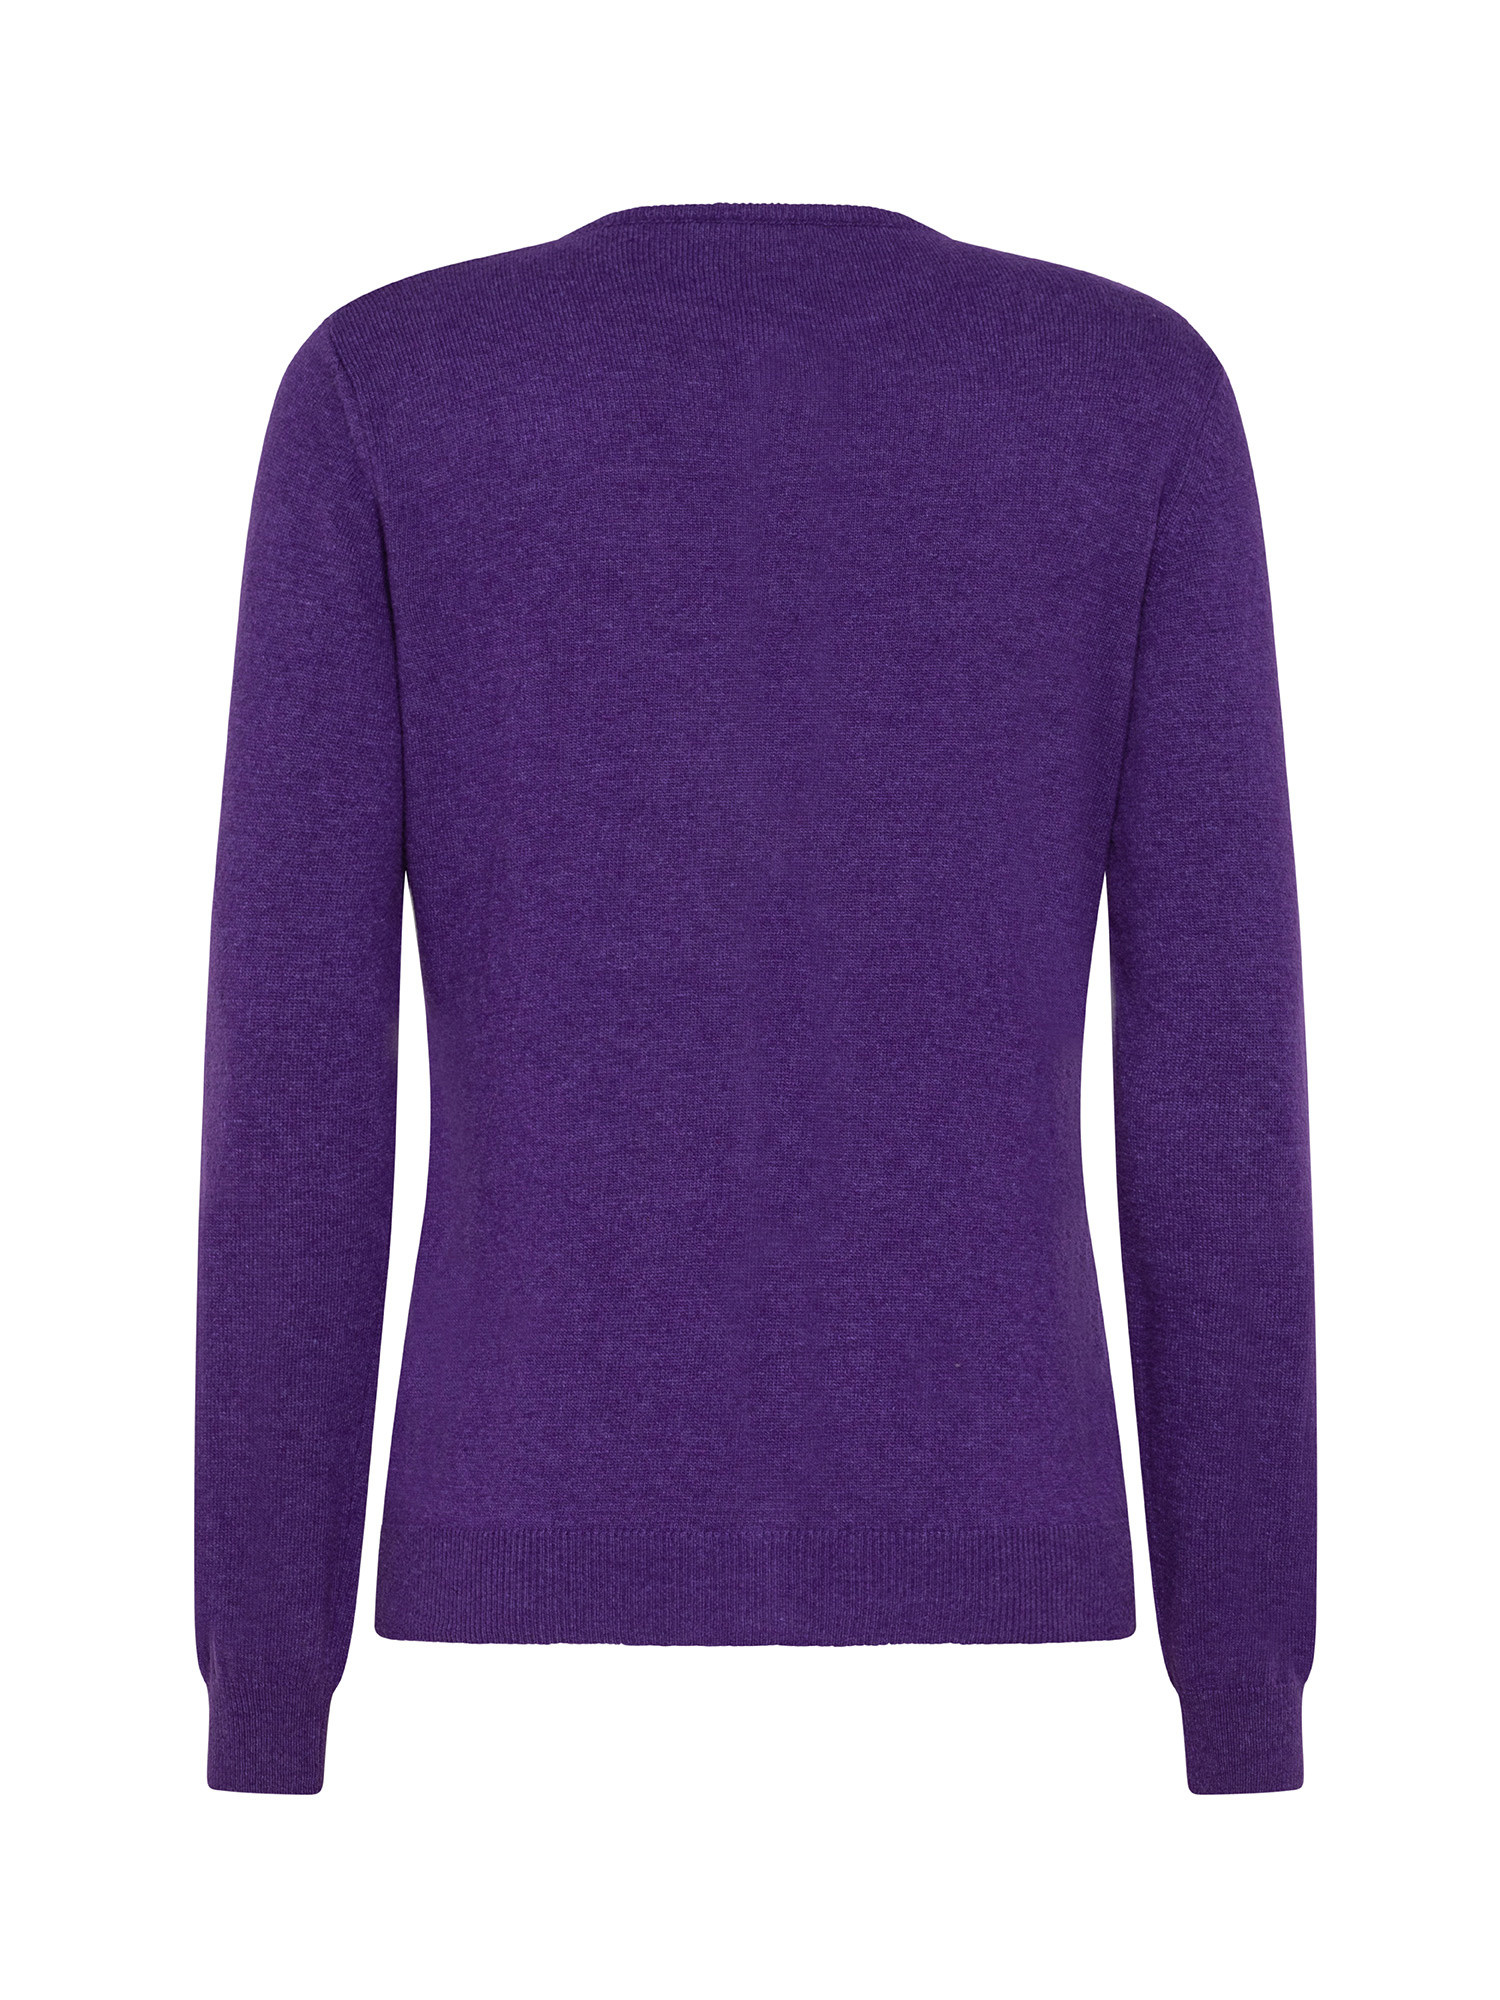 K Collection - Cardigan, Purple, large image number 1